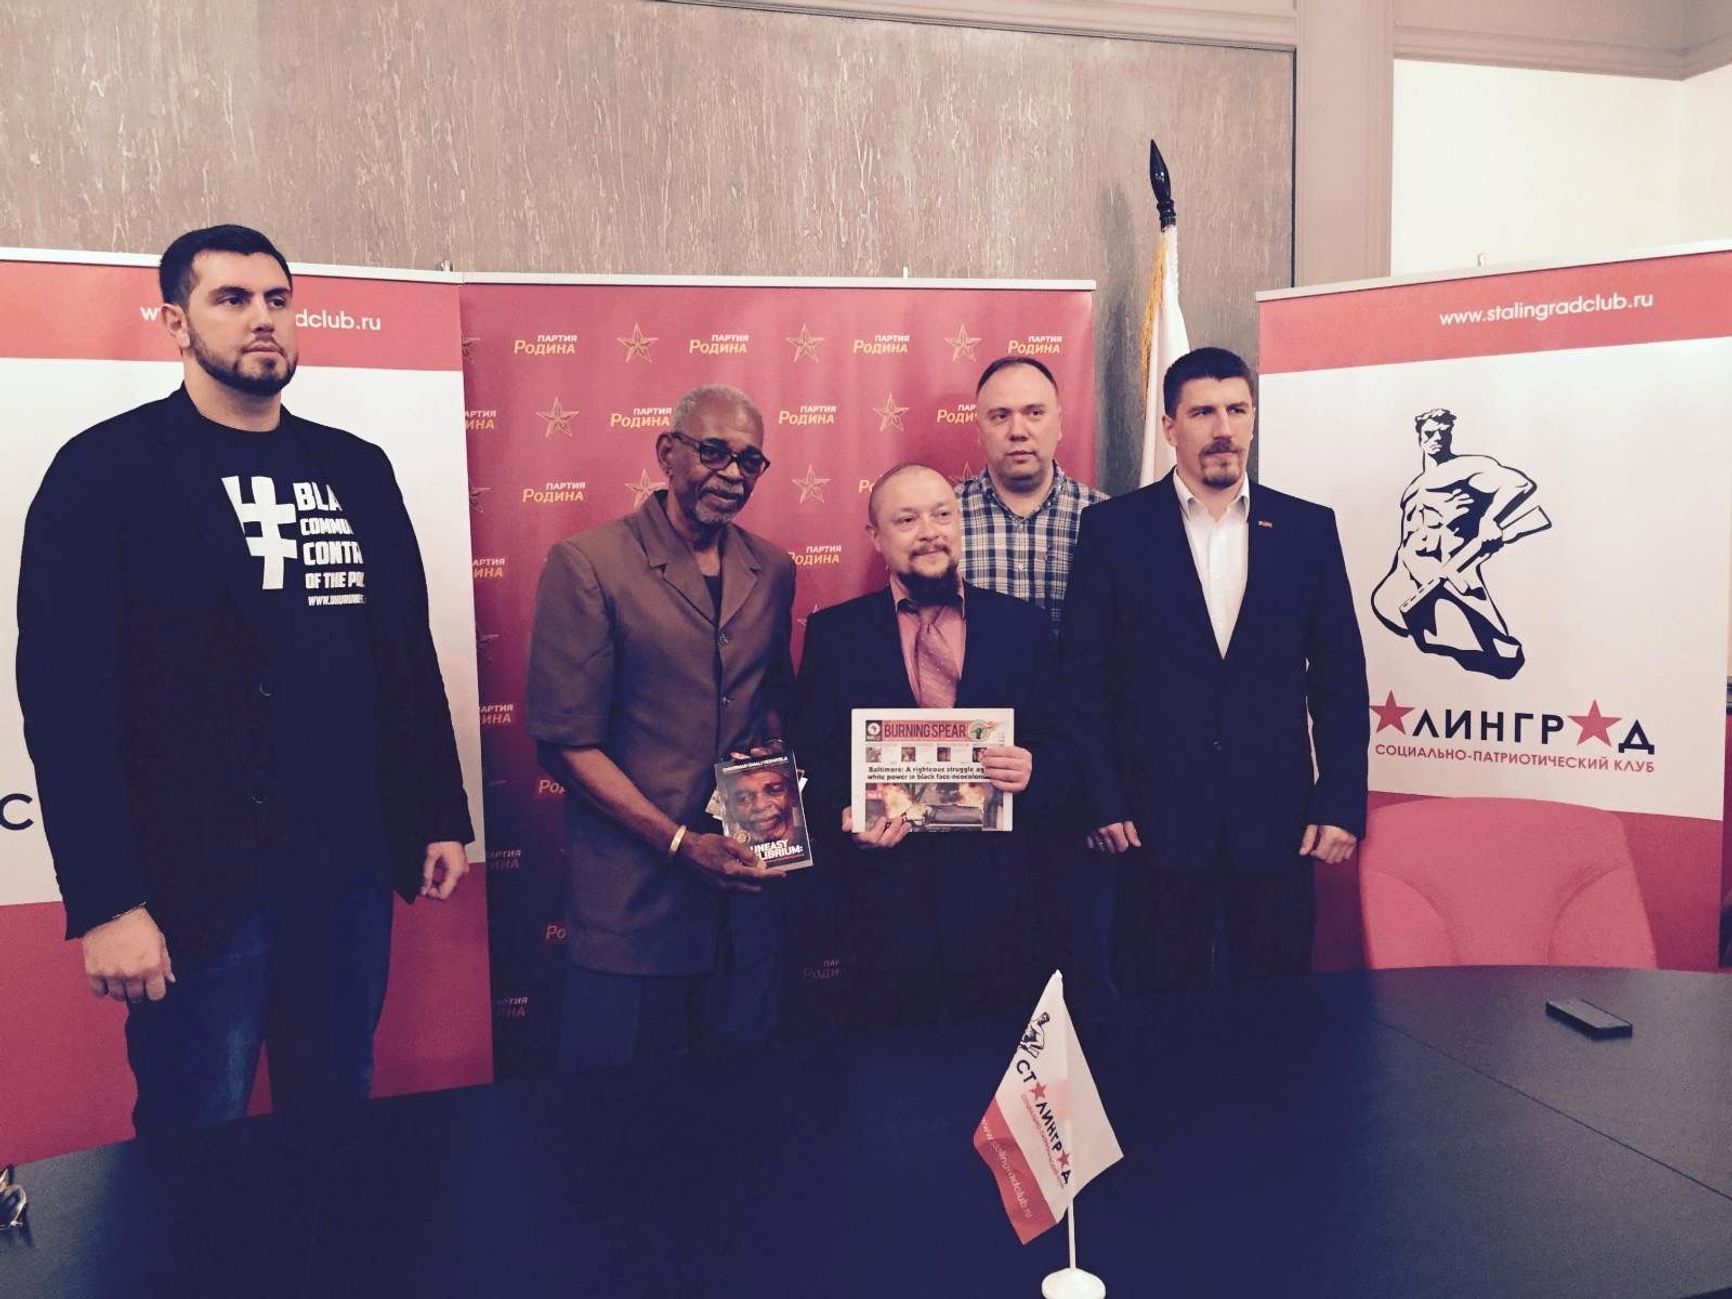 Alexander Ionor and Omali Yeshitela in Moscow, May 29, 2015